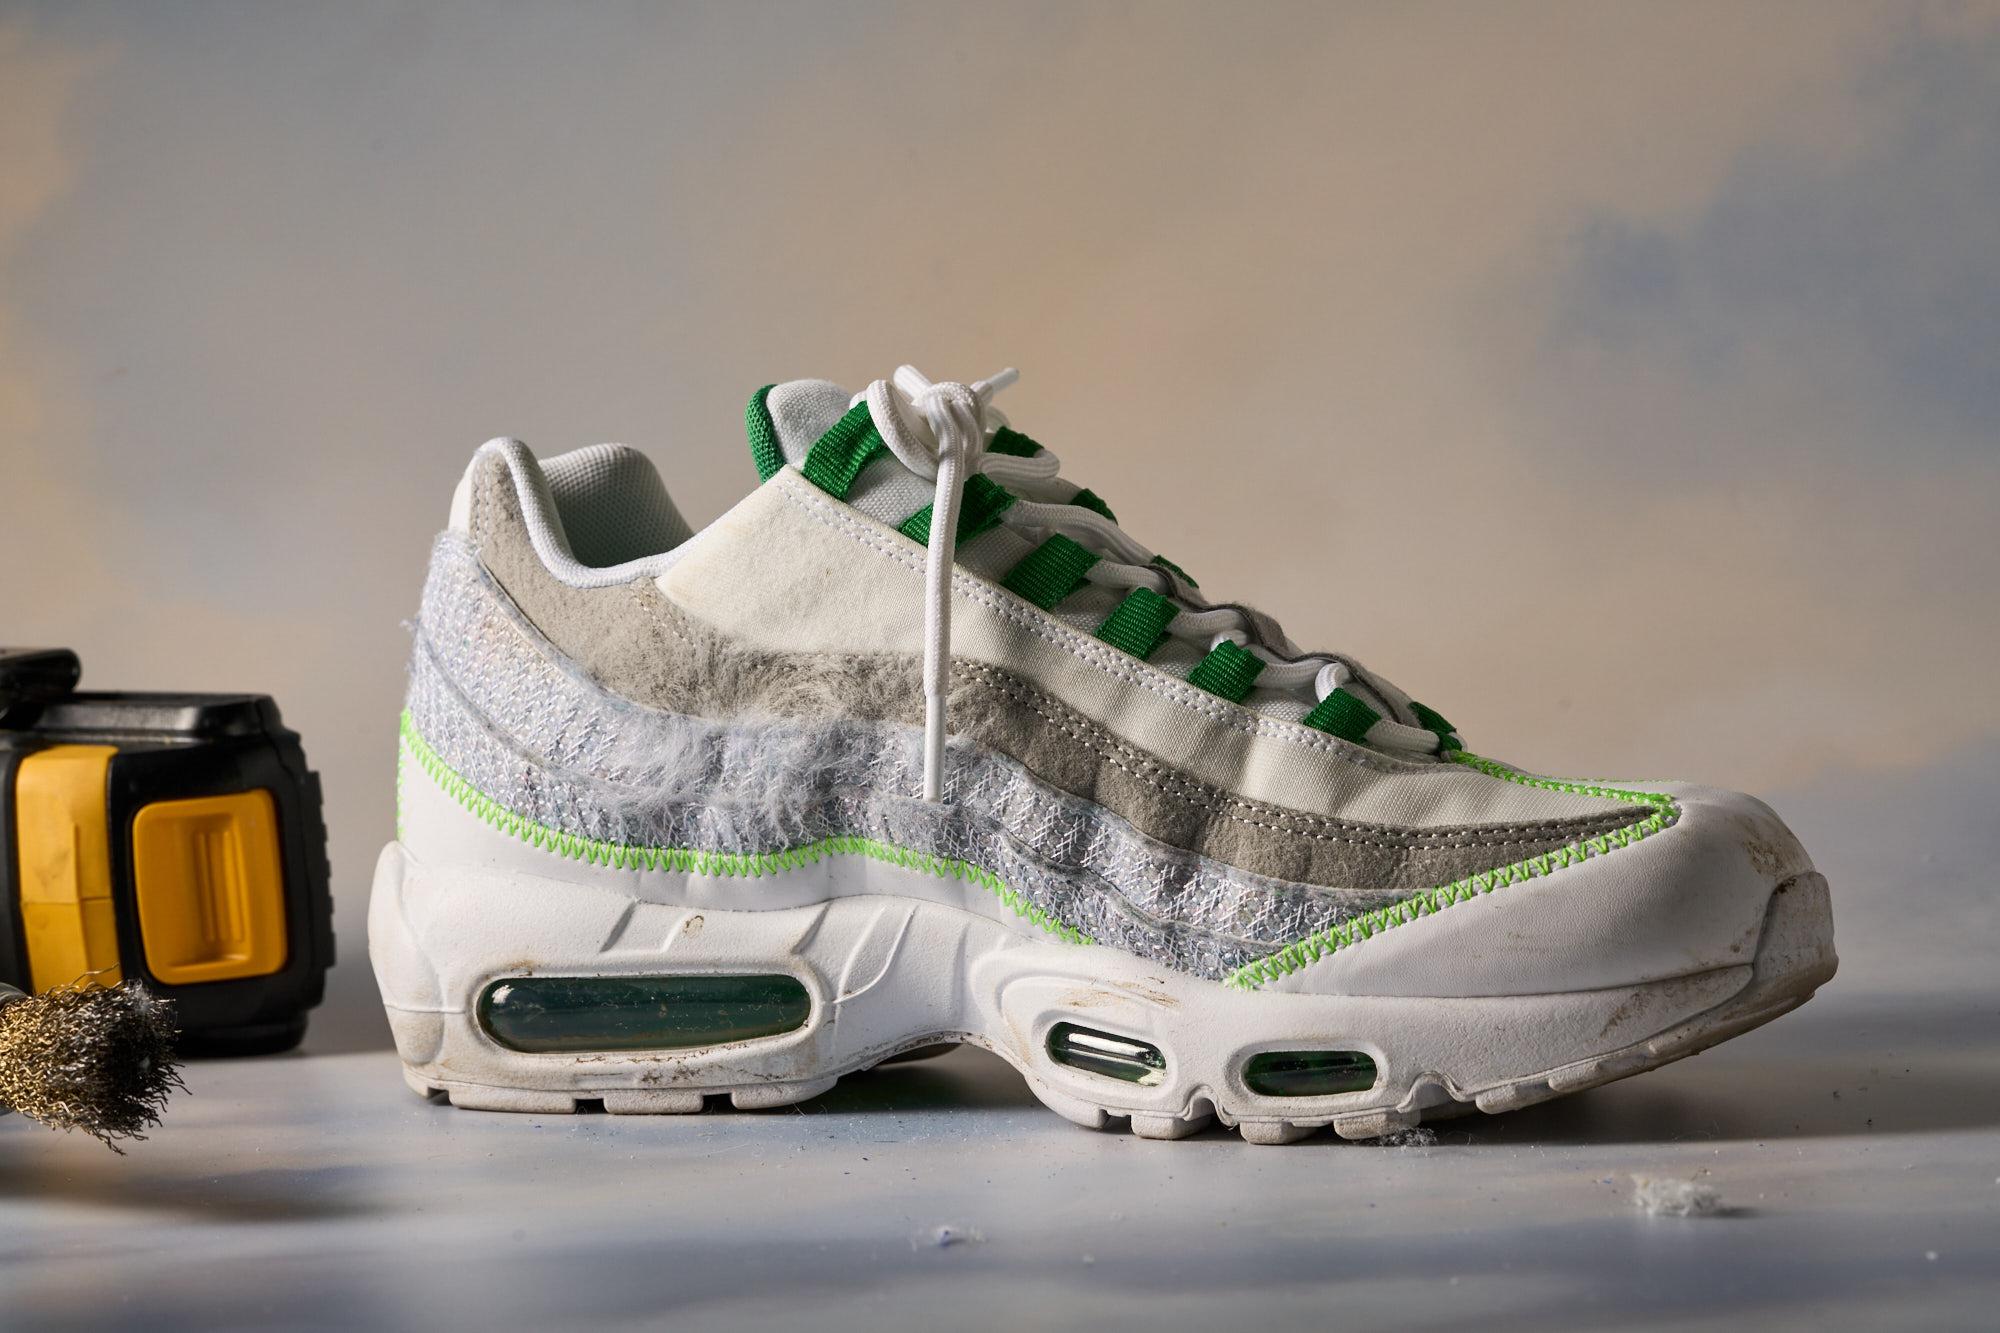 Nike Air Max 95 Review, Facts, Comparison | RunRepeat